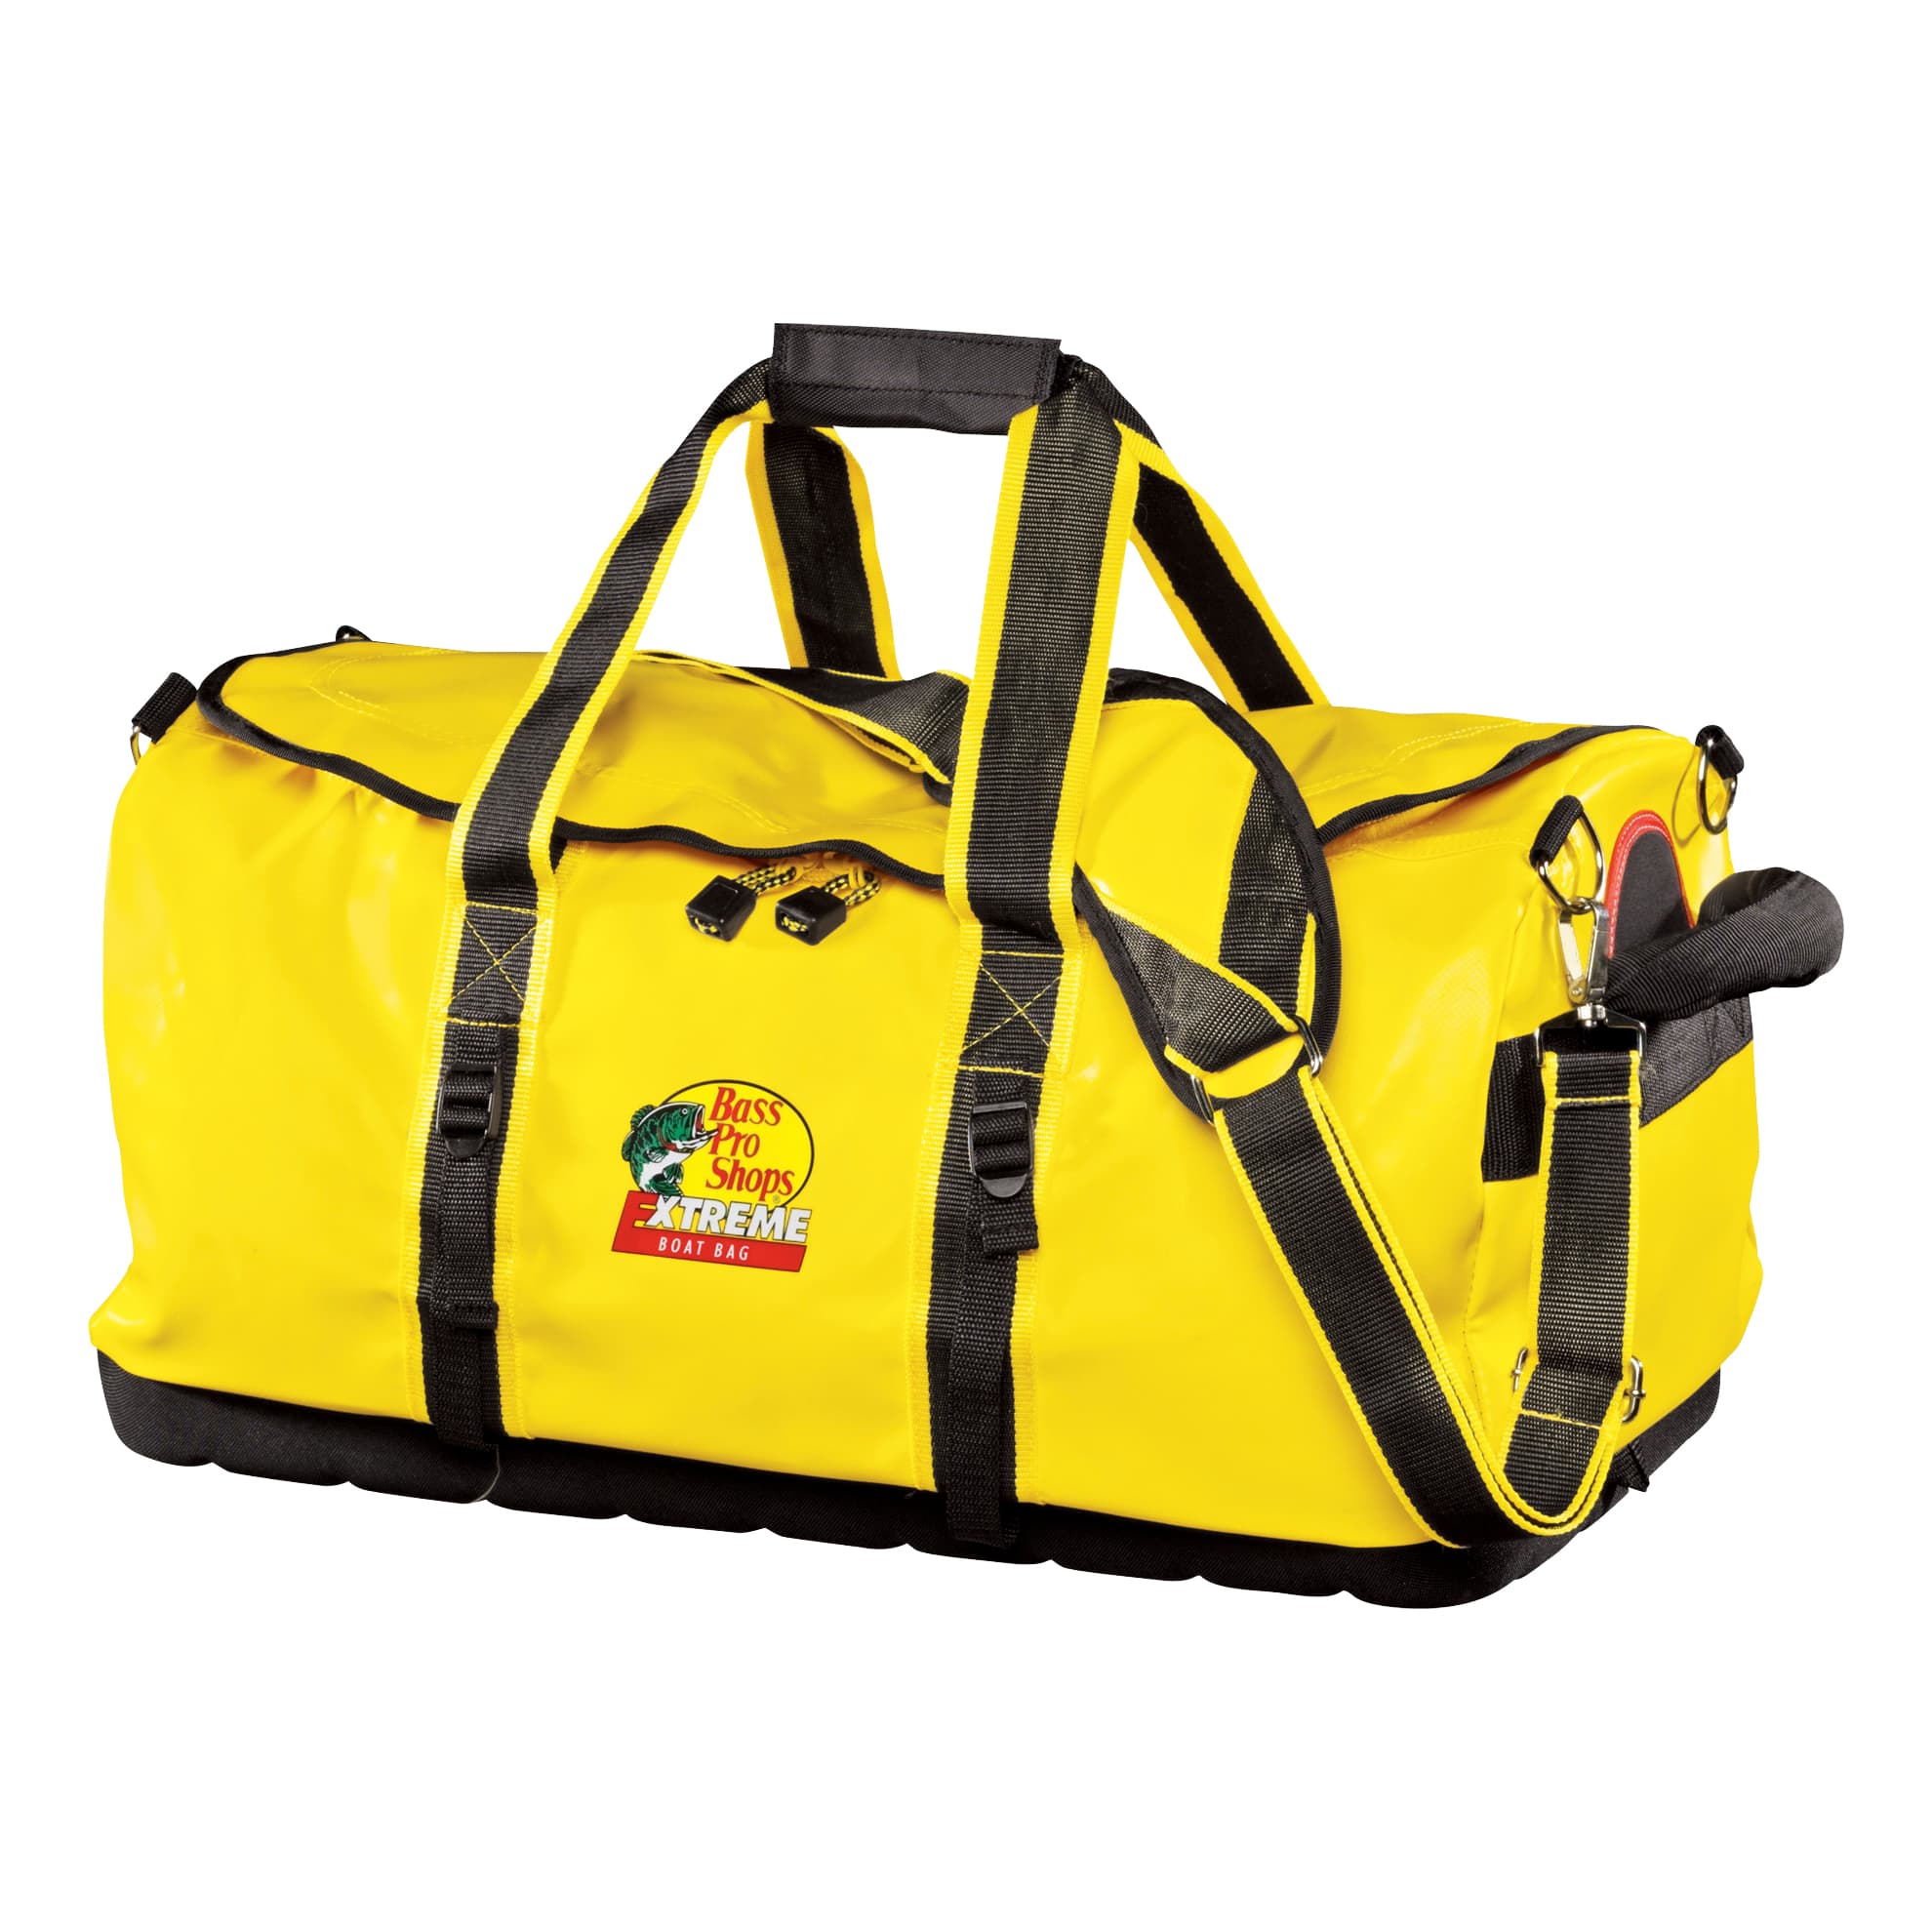 Bass Pro Shops Extreme Boat Bag - Cabelas - BASS PRO - Tackle Bags